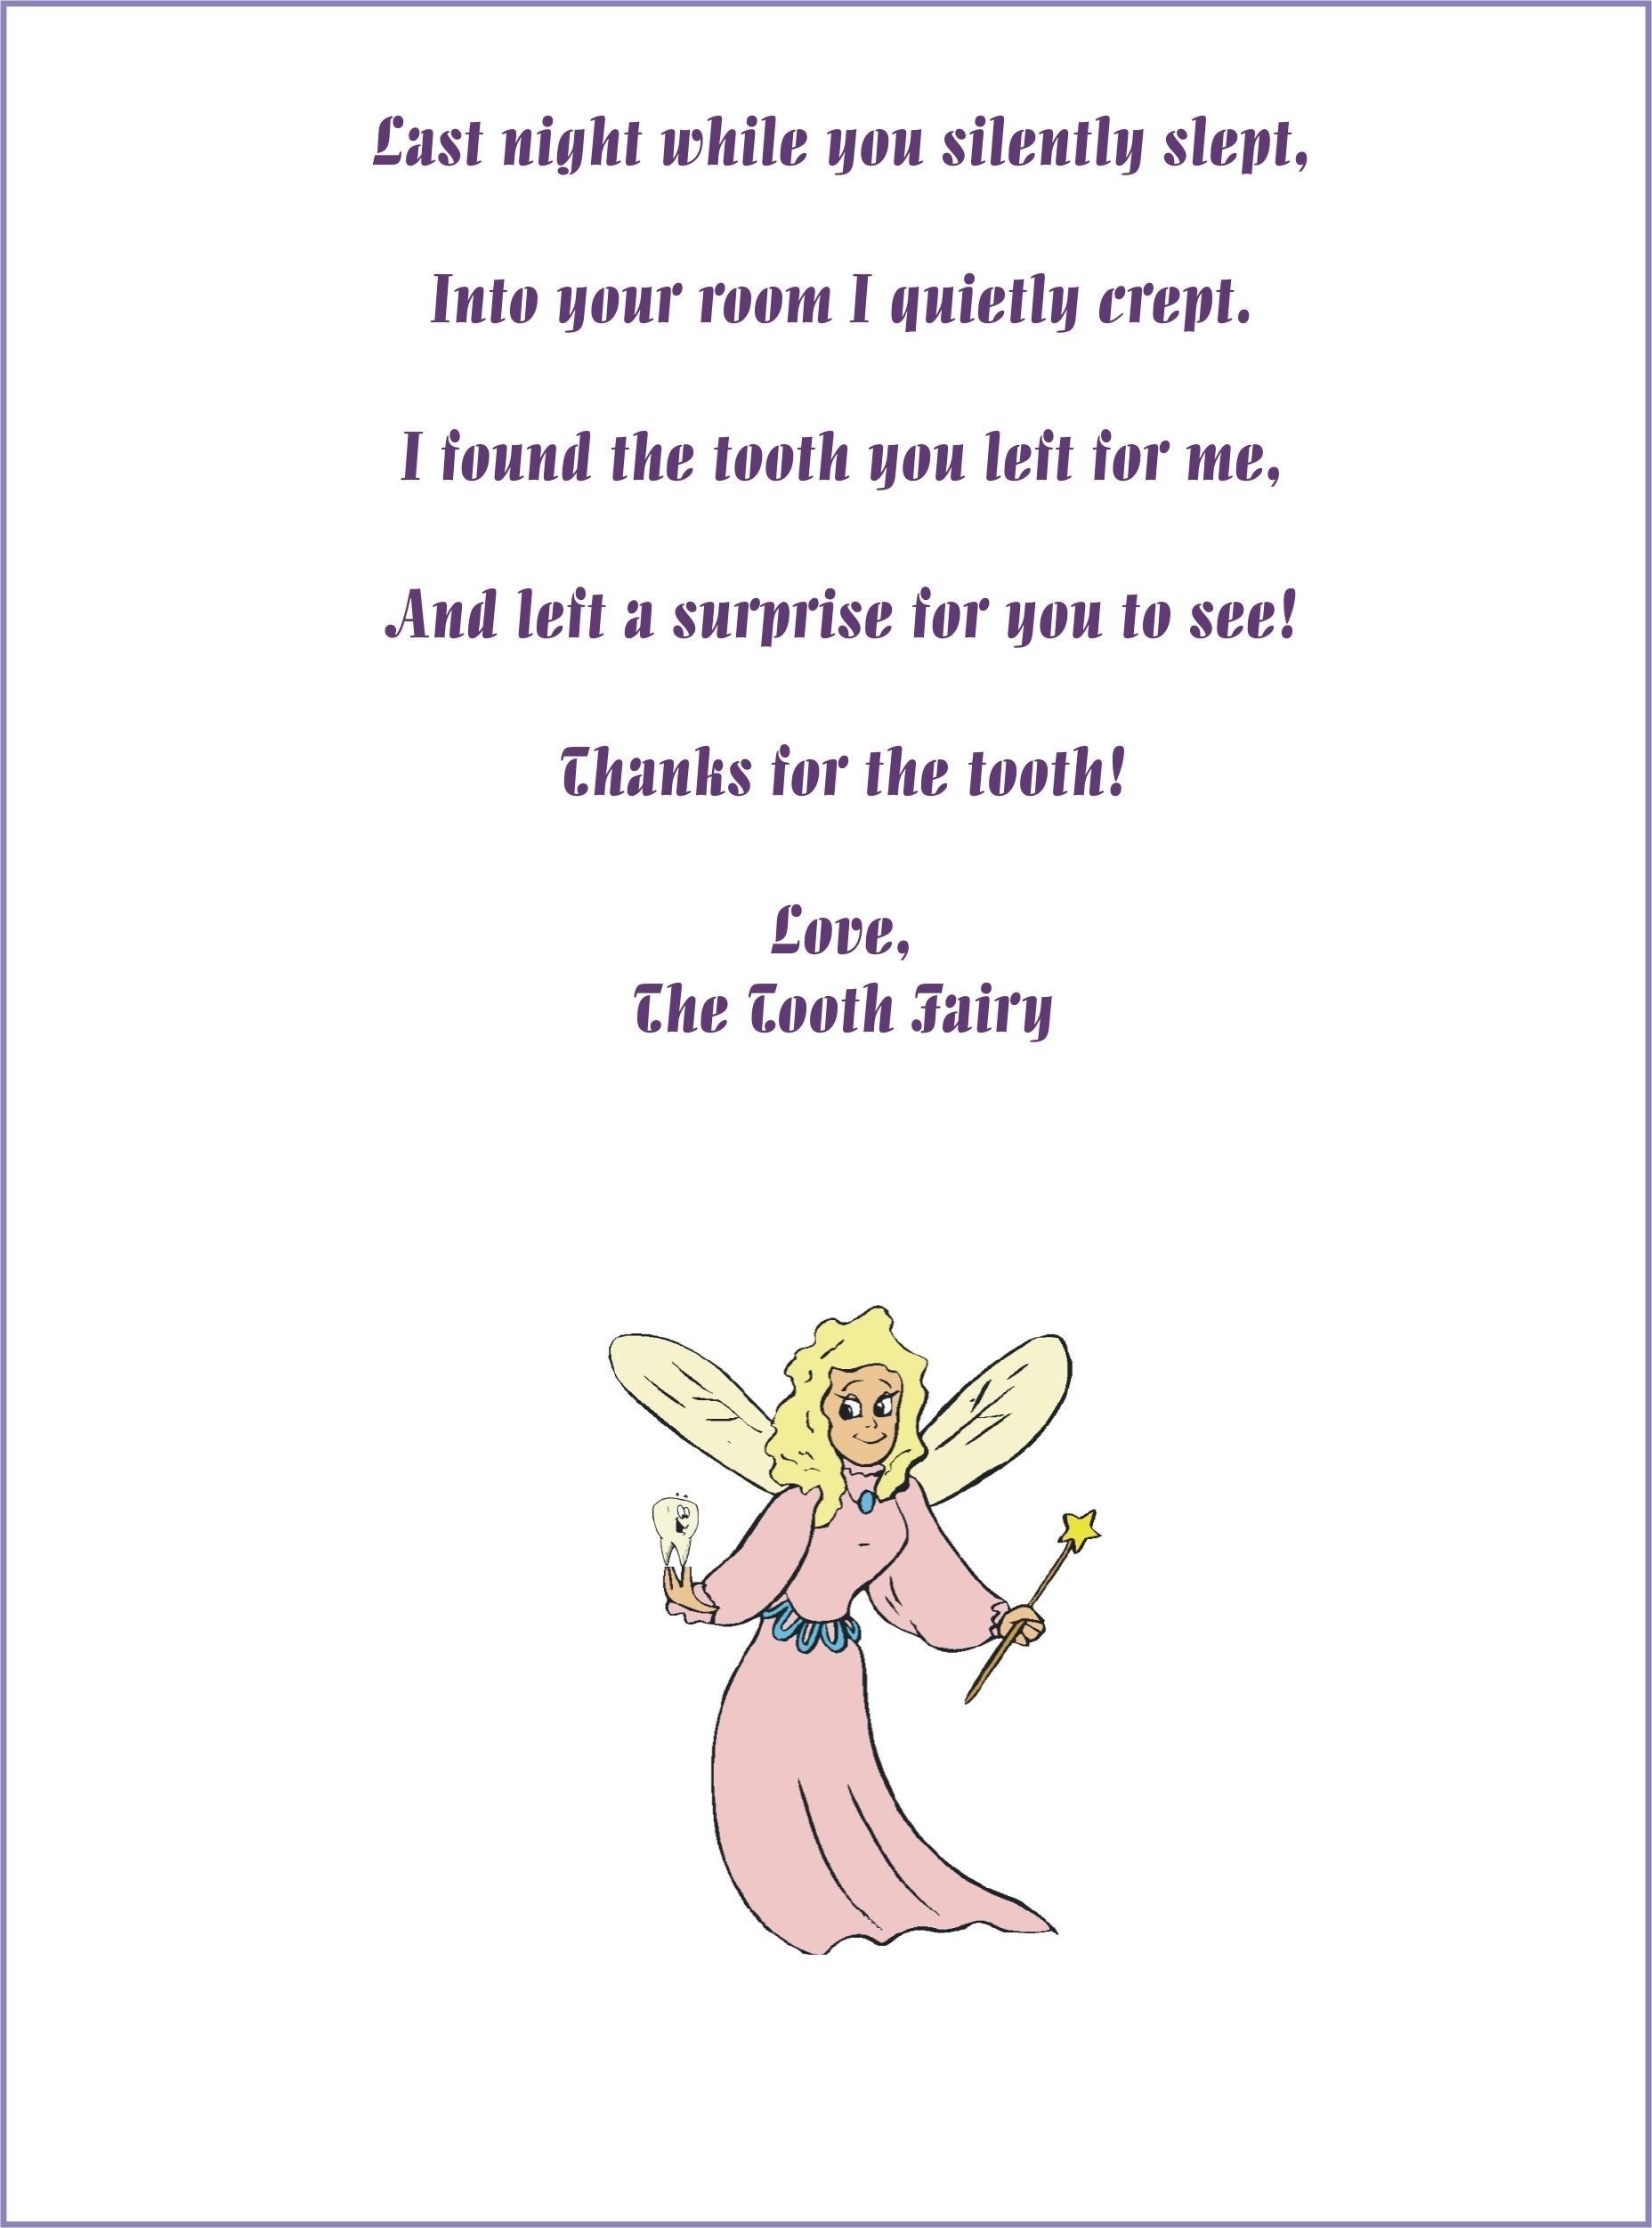 Free Customizable Tooth Fairy Letters! Opens In Word So You Can Type - Free Printable Tooth Fairy Letters